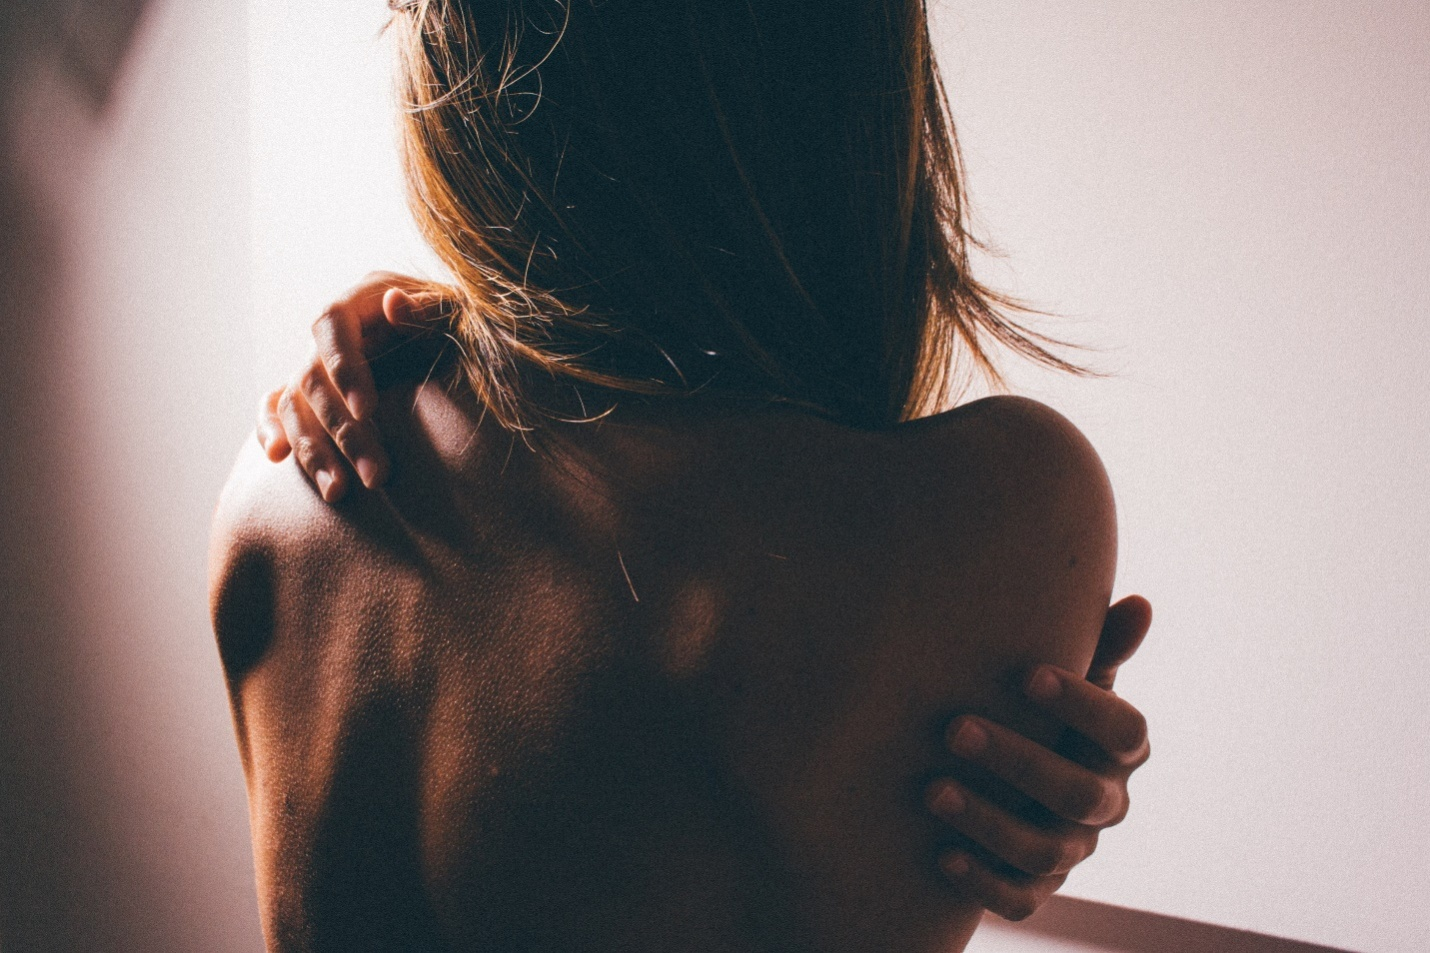 An image of a woman’s back